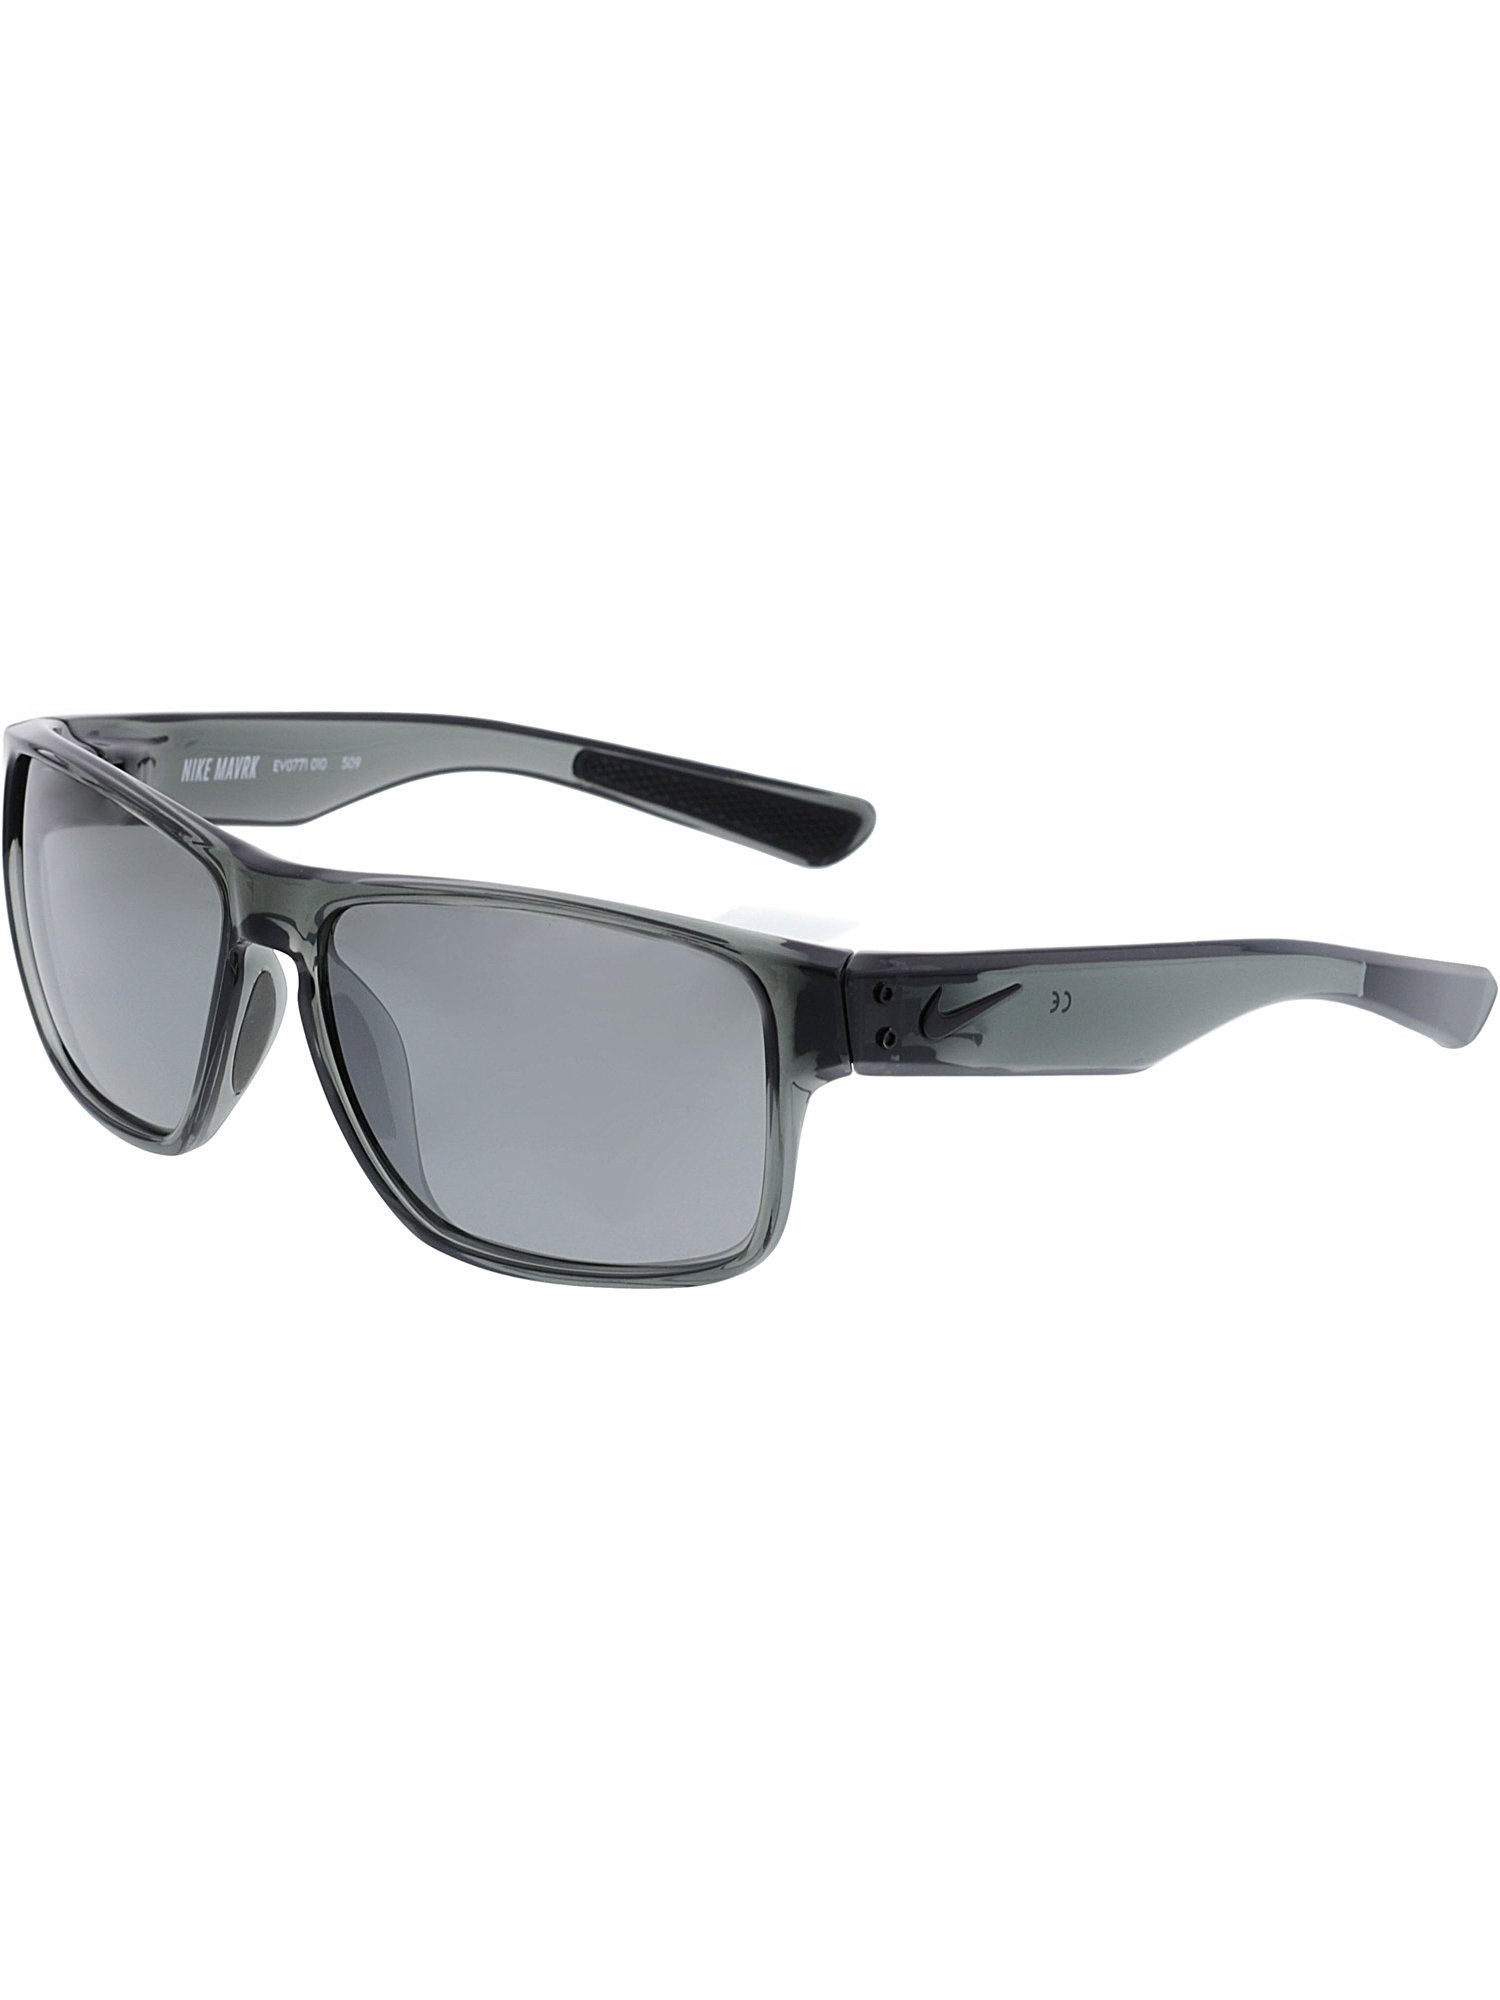 Nike Men's Mirrored Mavrk Grey Rectangle Sunglasses sold by AreaTrend ...